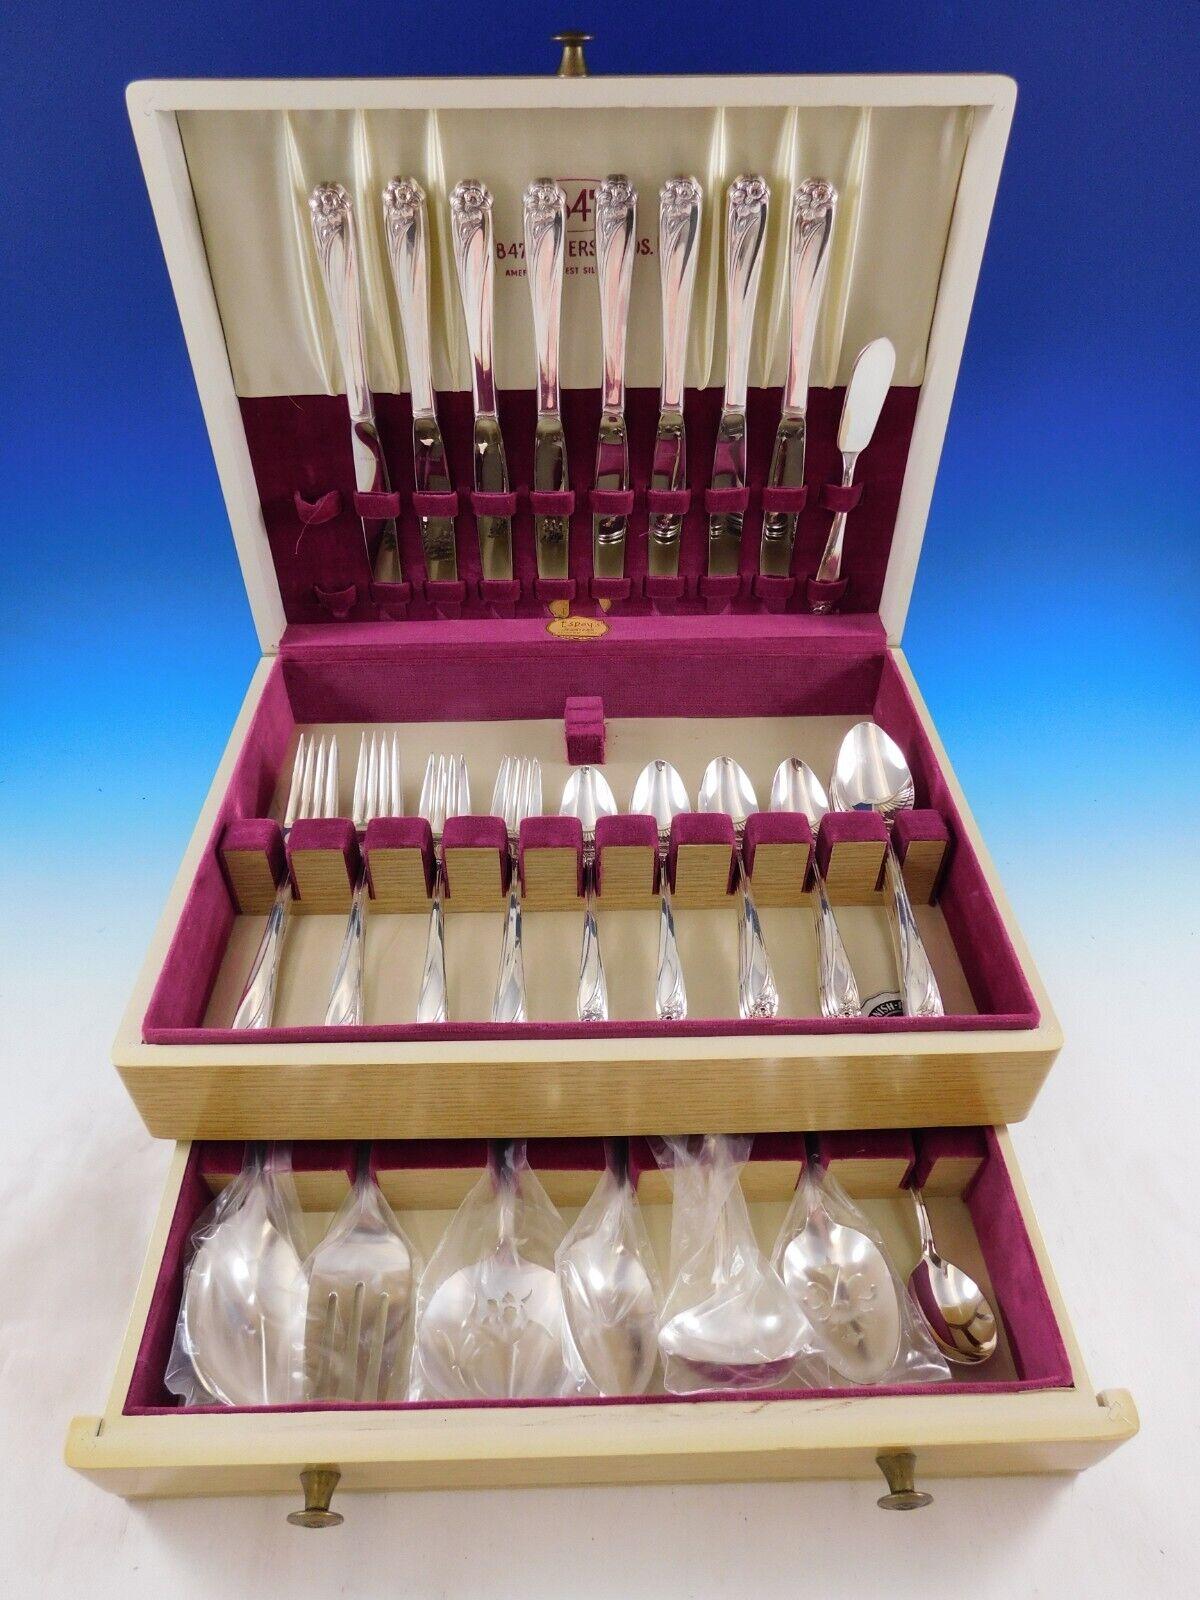 Daffodil by 1847 Rogers Silverplate Flatware set, 57 pieces. This is a highly collectible pattern. This set includes:

8 Dinner Knives, 9 1/2